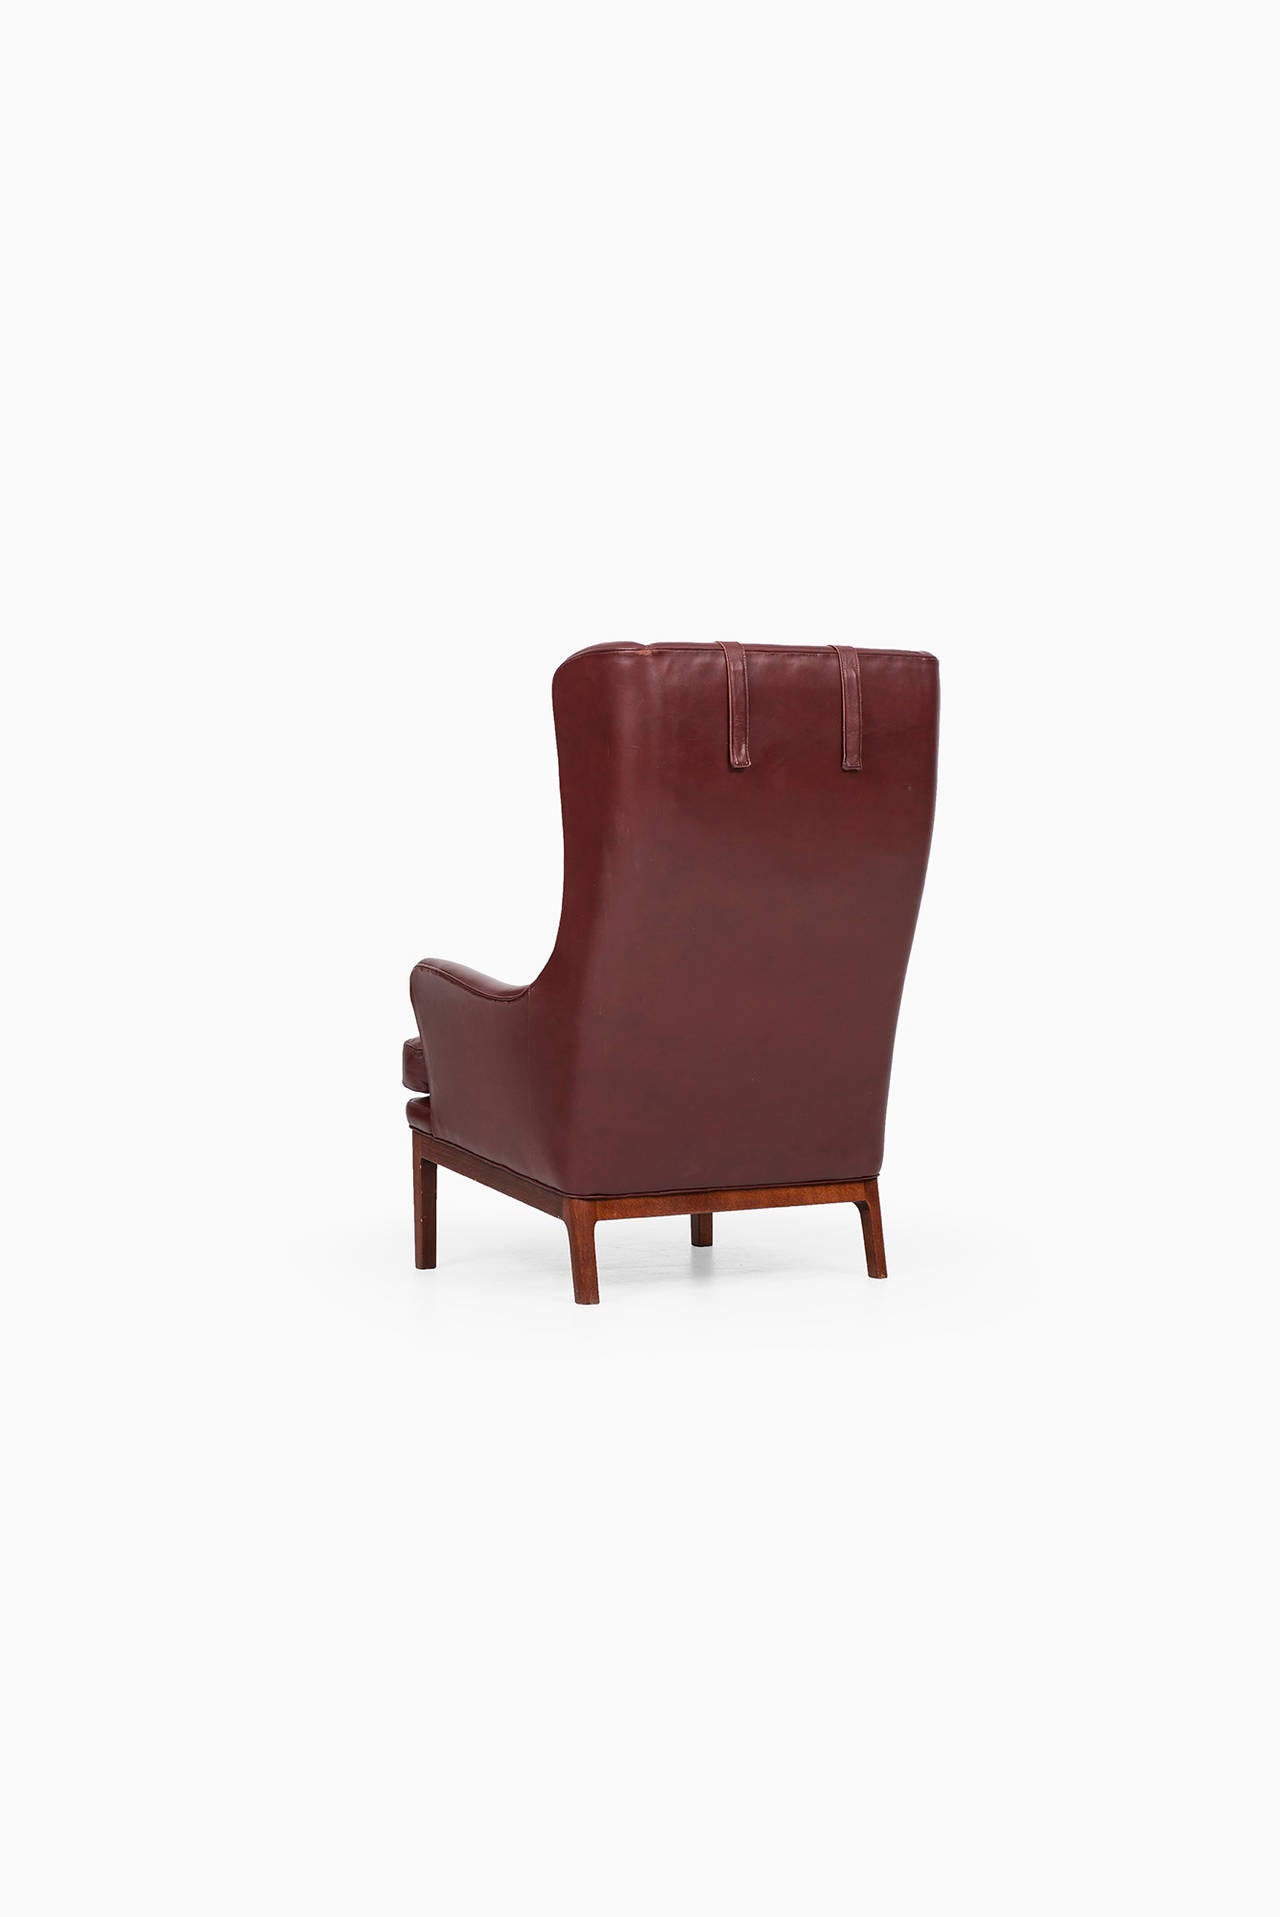 Mid-20th Century Arne Norell Wingback Easy Chairs in Dark Red Leather by Norell AB in Sweden